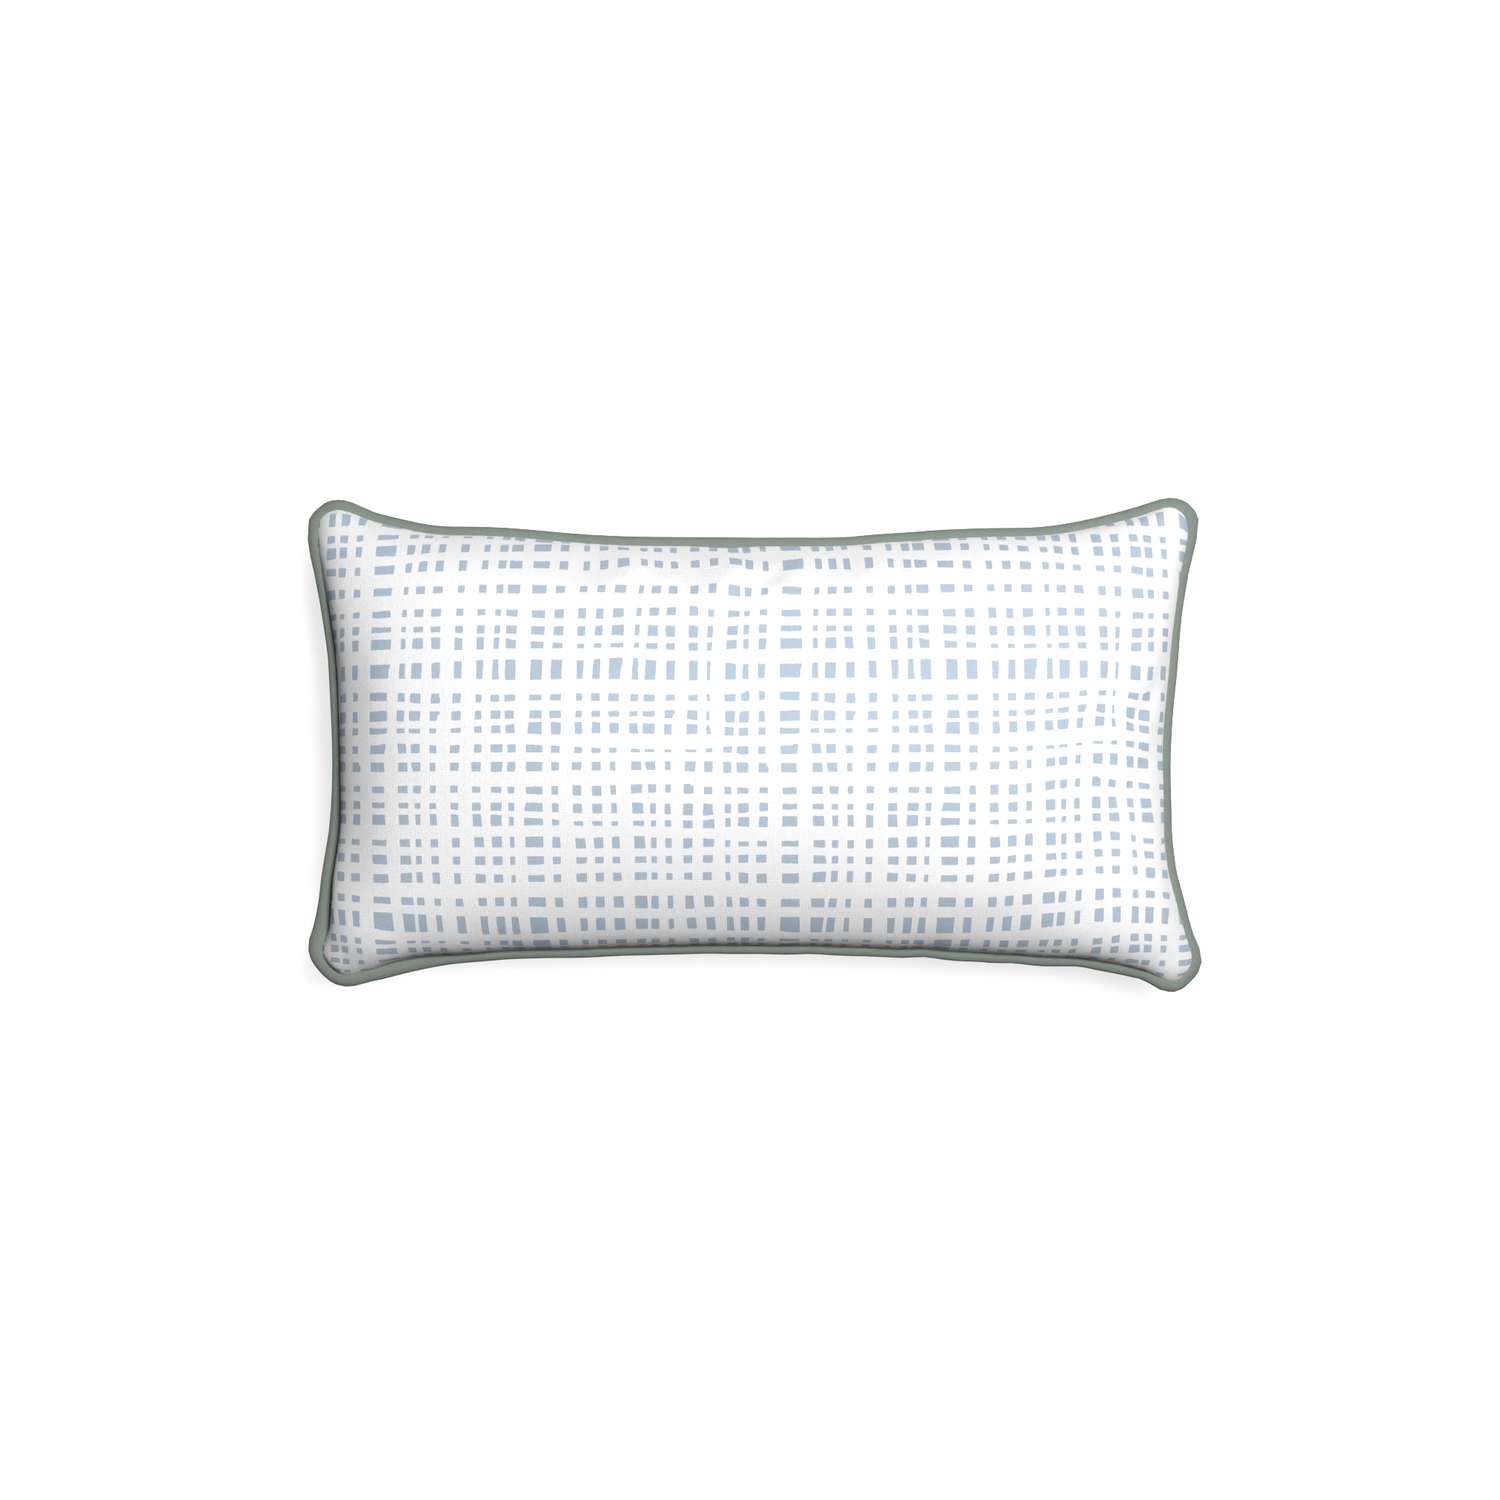 Petite-lumbar ginger custom plaid sky bluepillow with sage piping on white background